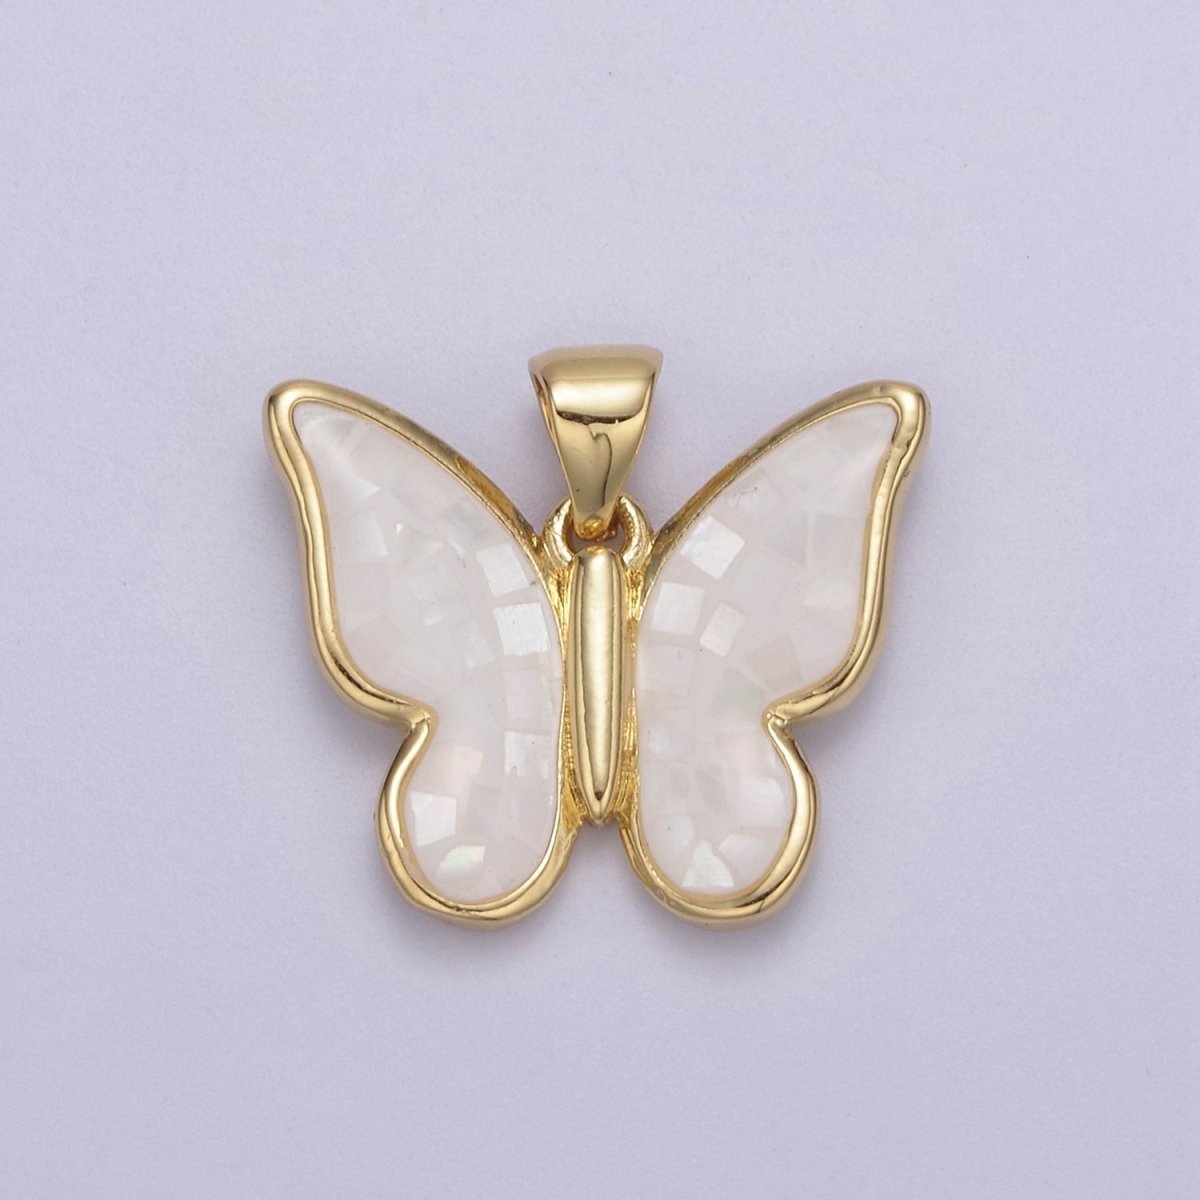 White / Pink / Blue / Green Opal Mariposa Butterfly Charm for Necklace, Dainty Butterfly Pendant for Jewelry Making Supply in Gold Filled H-583 H-587 H-589 H-596 - DLUXCA